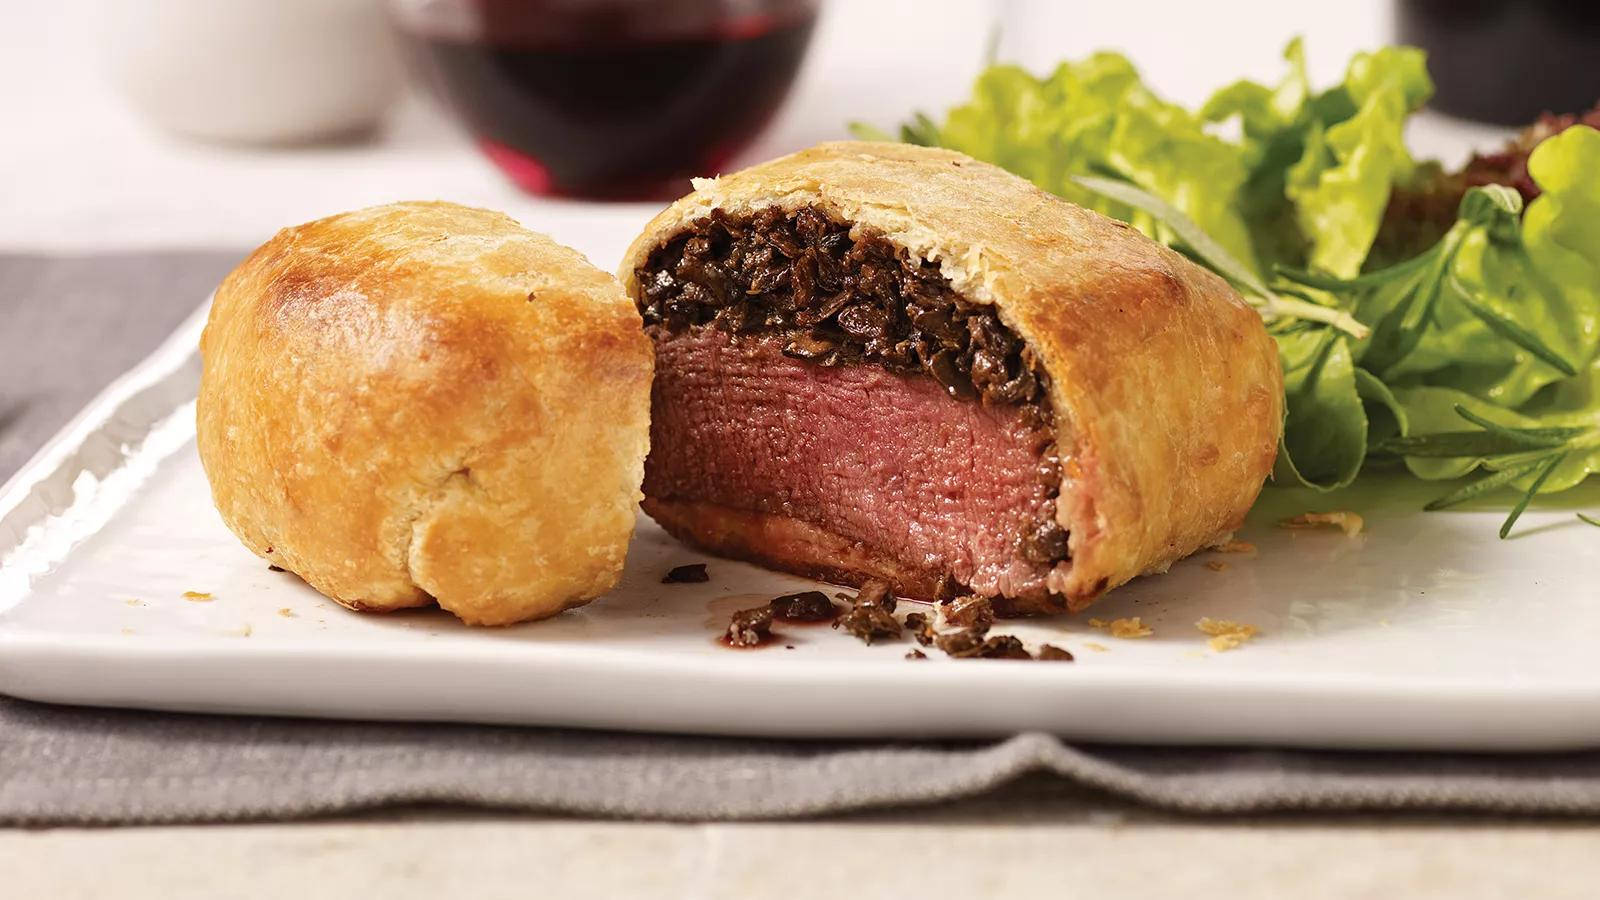 Exquisite Beef Wellington with Leafy Green Garnish Wallpaper